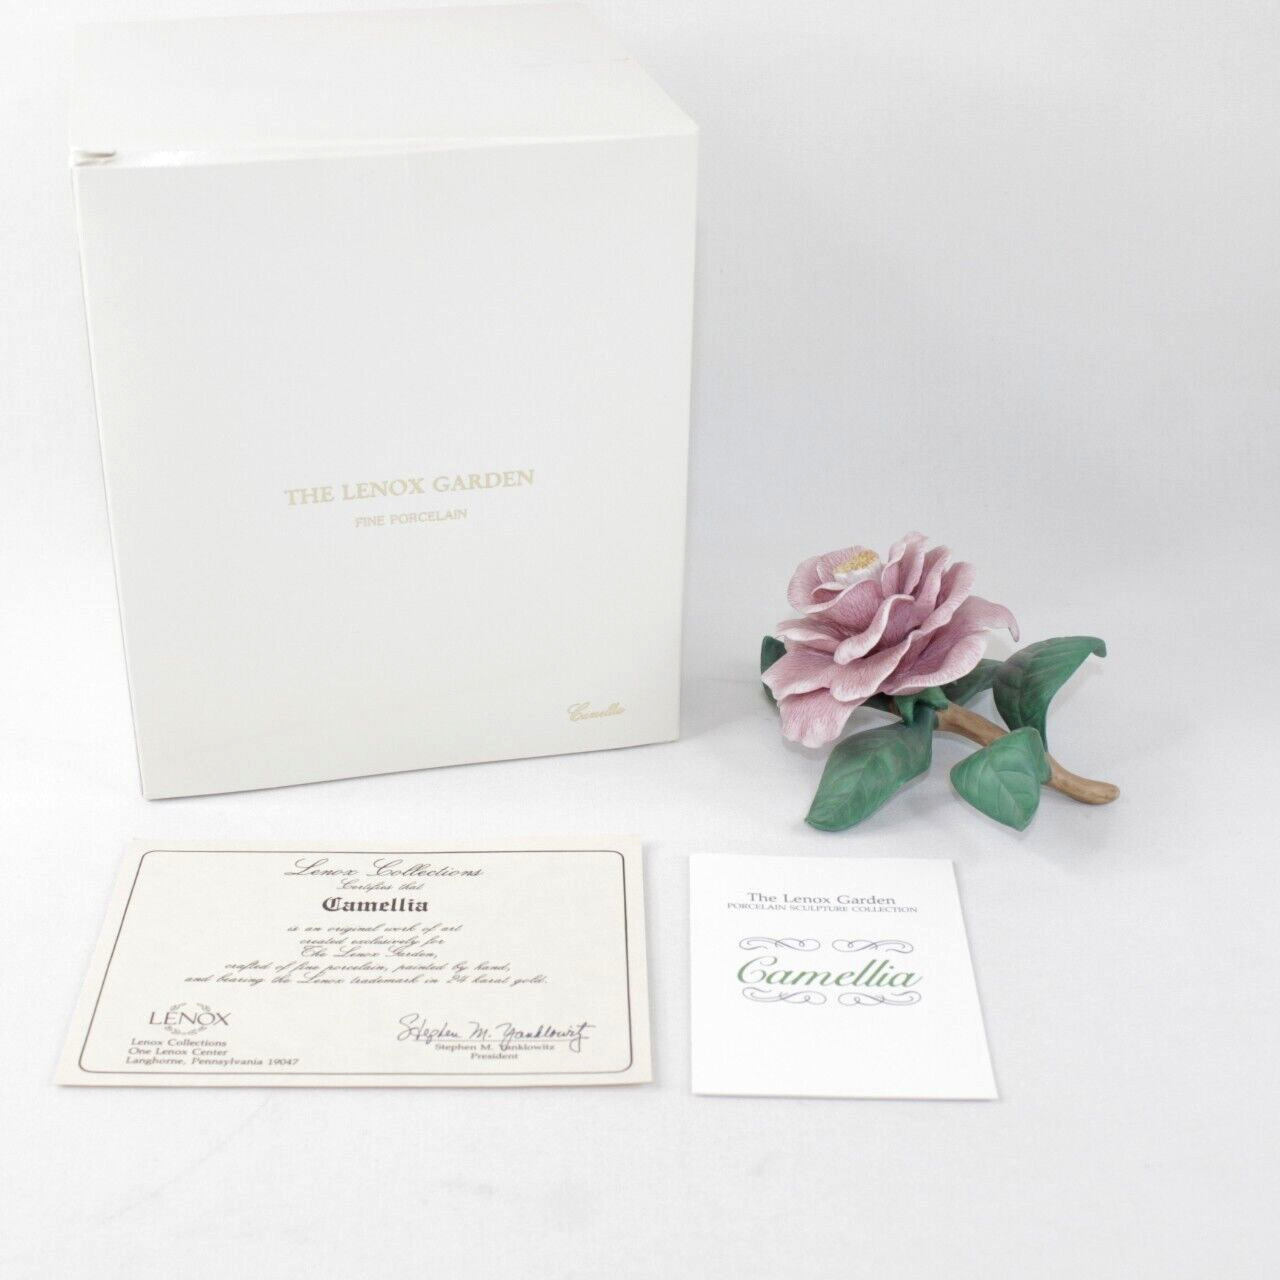 Lenox Fine Porcelain Garden Flower Collection Camellia with Box and Paperwork